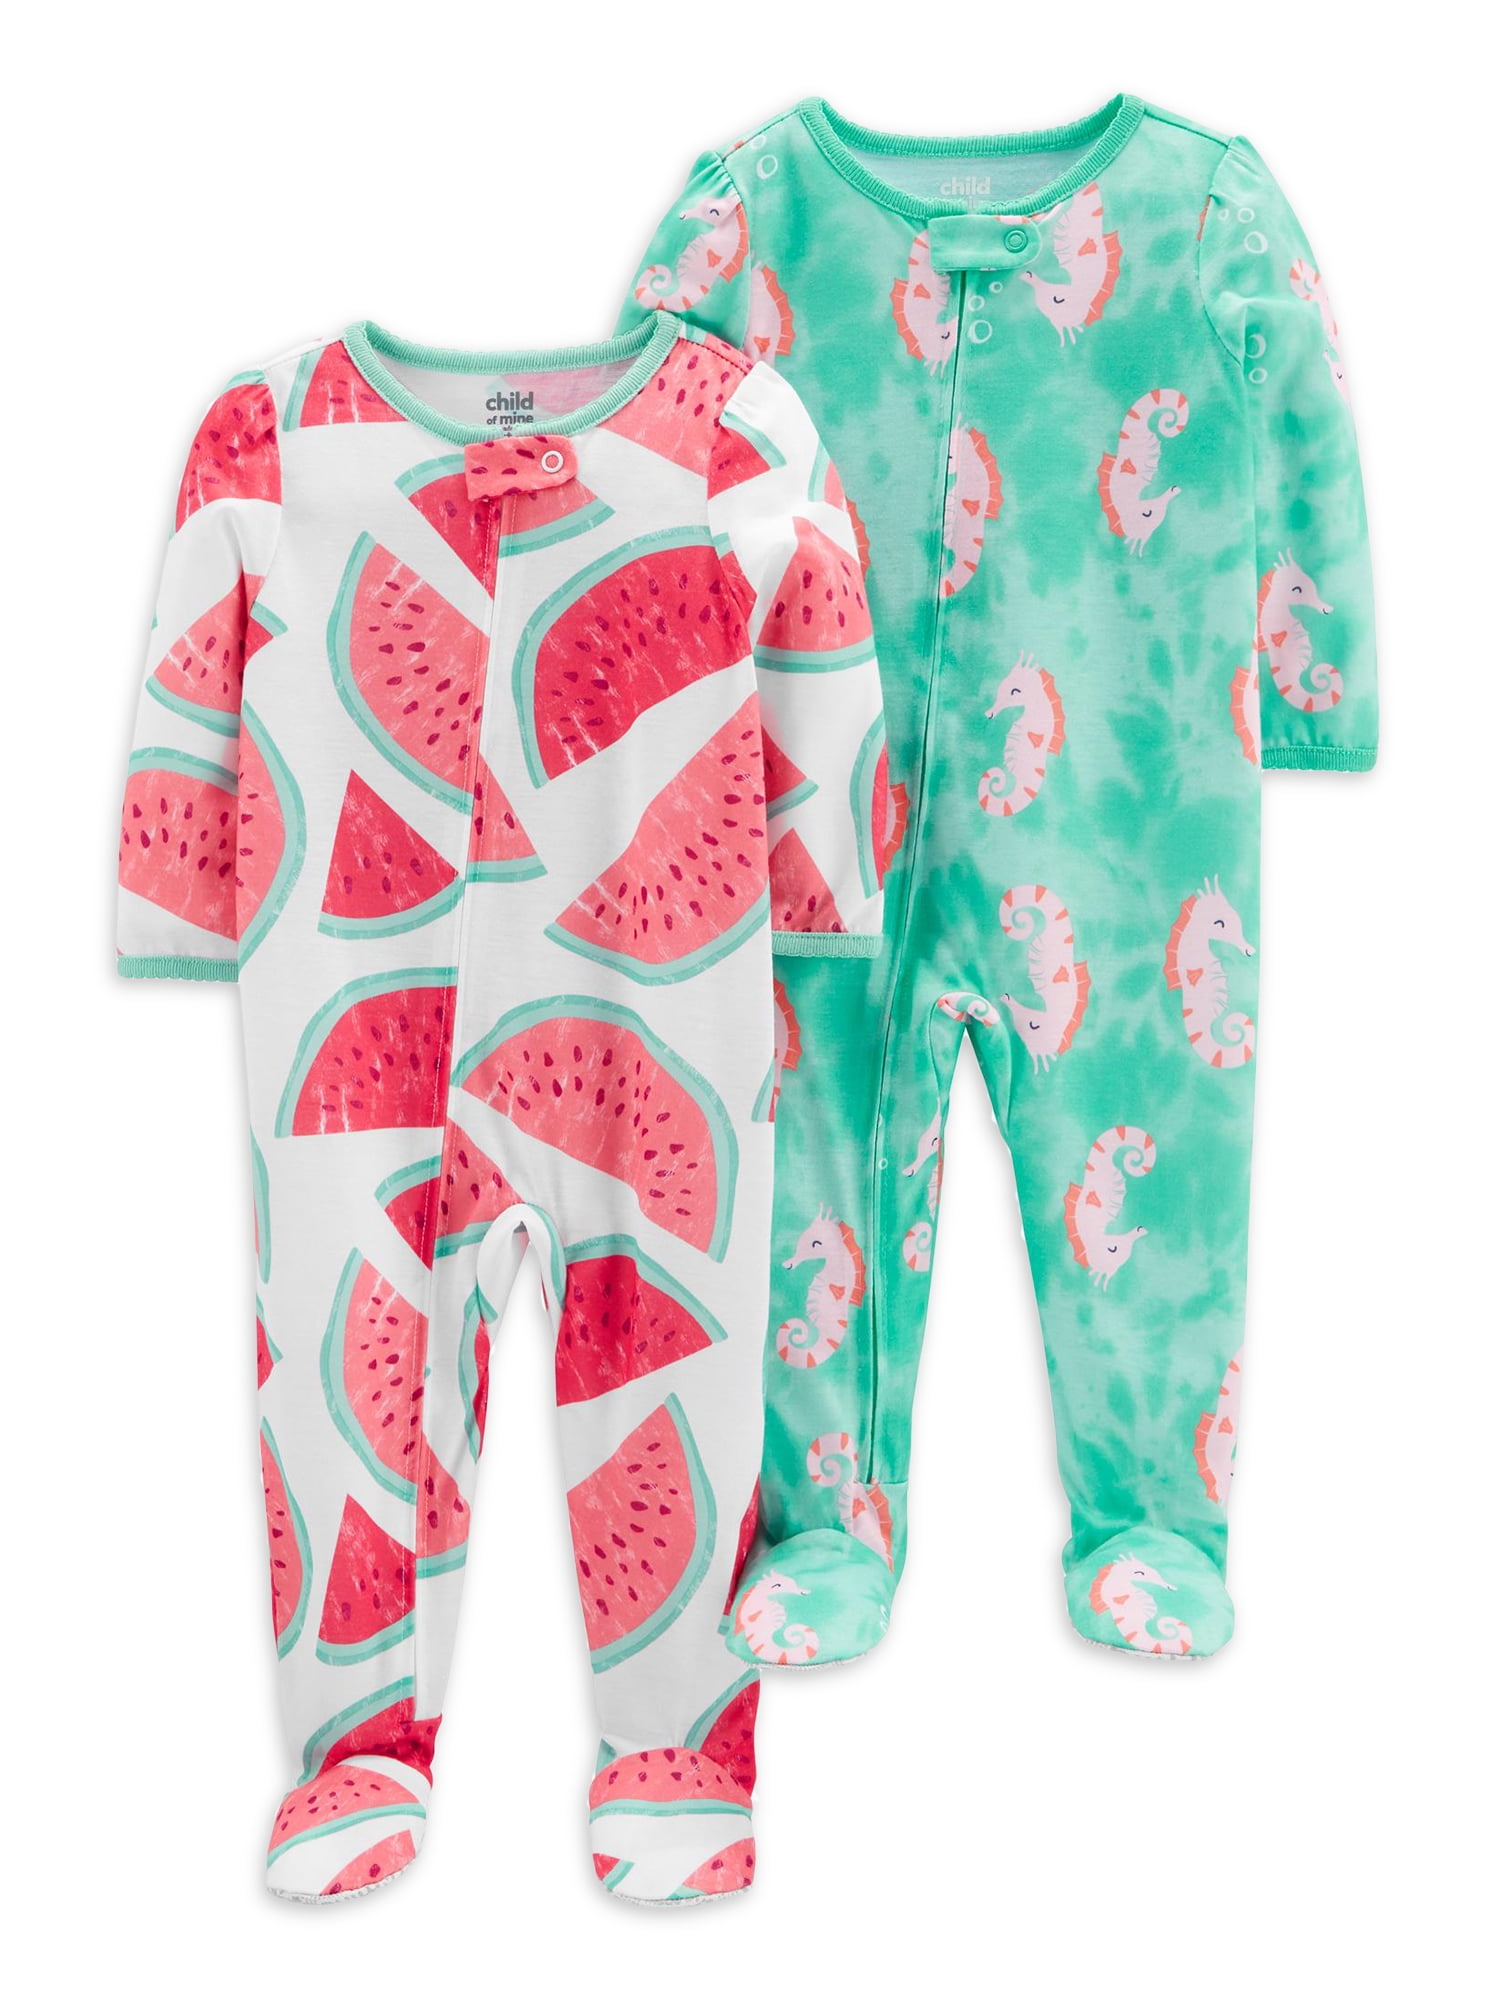 2 Pack Boys Girls Crafted Nightwear Design Pyjamas Sizes Age from 2 to 8 Yrs 